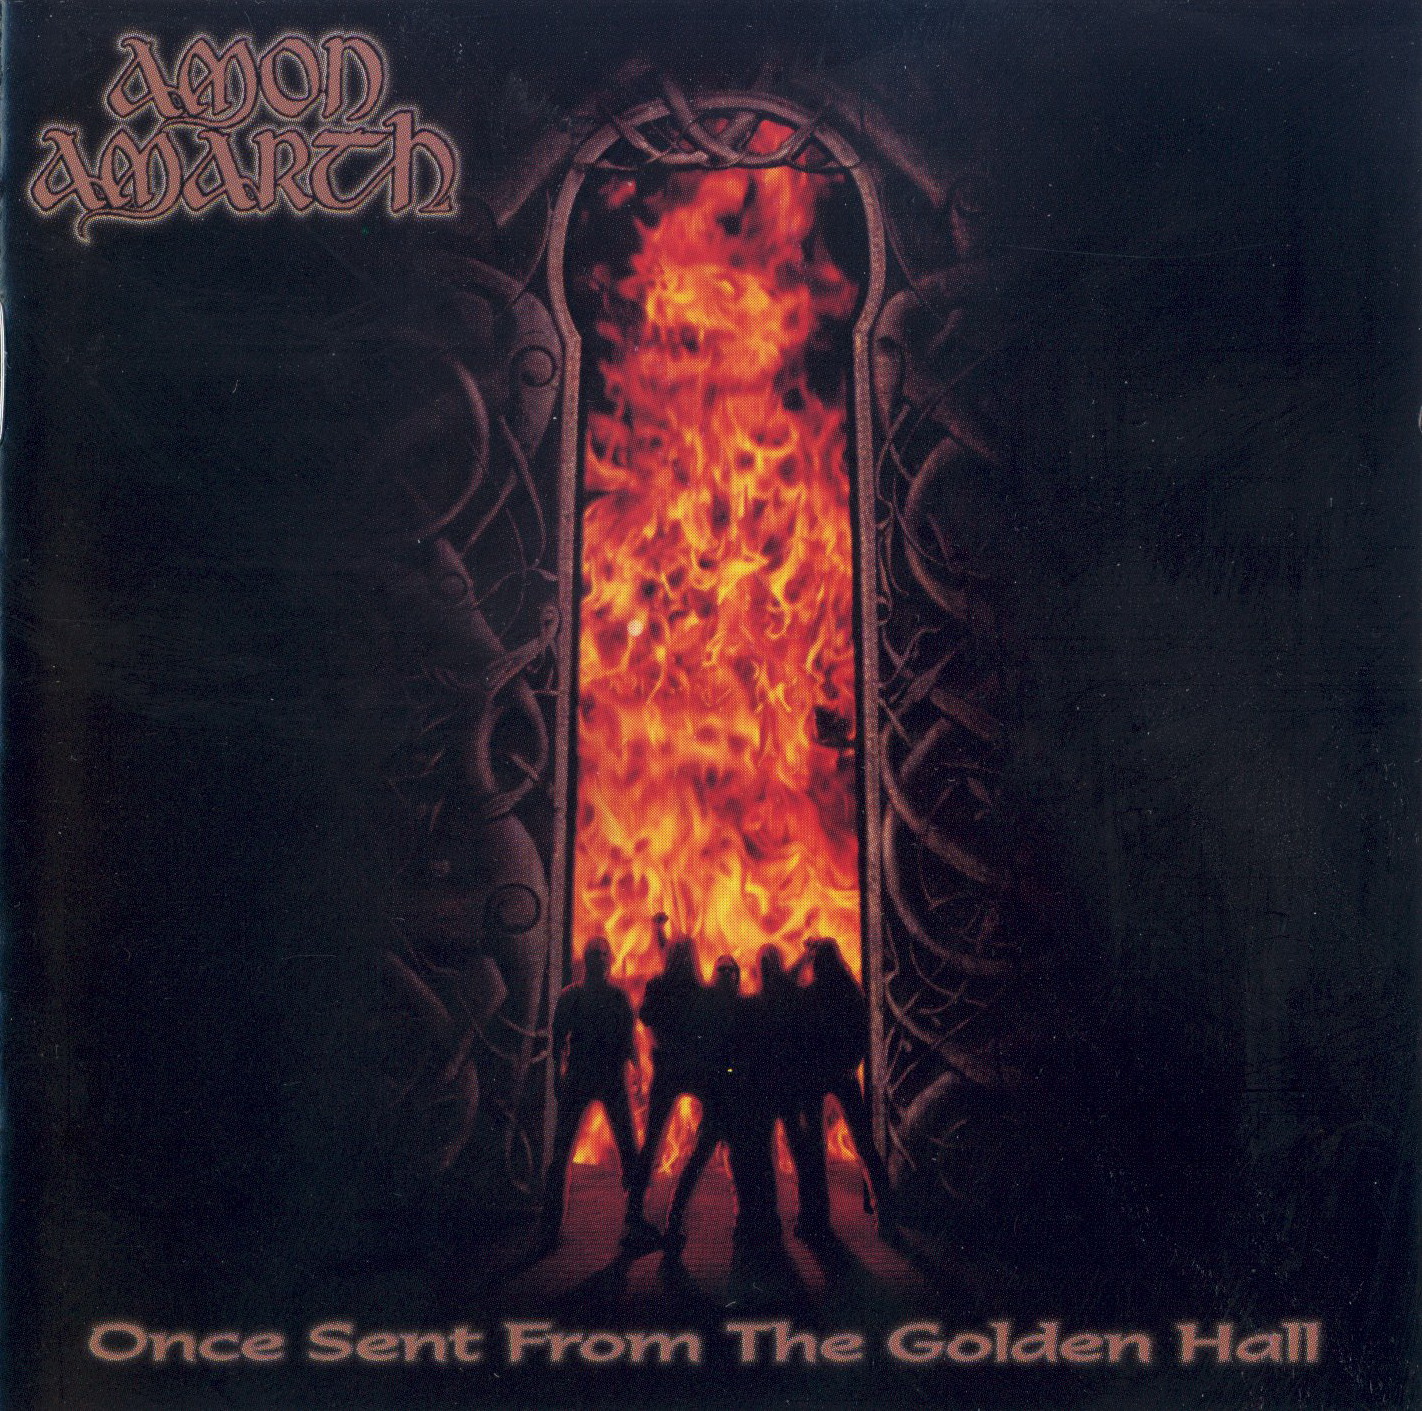 Covers - Once Sent From The Golden Hall - Front.jpg